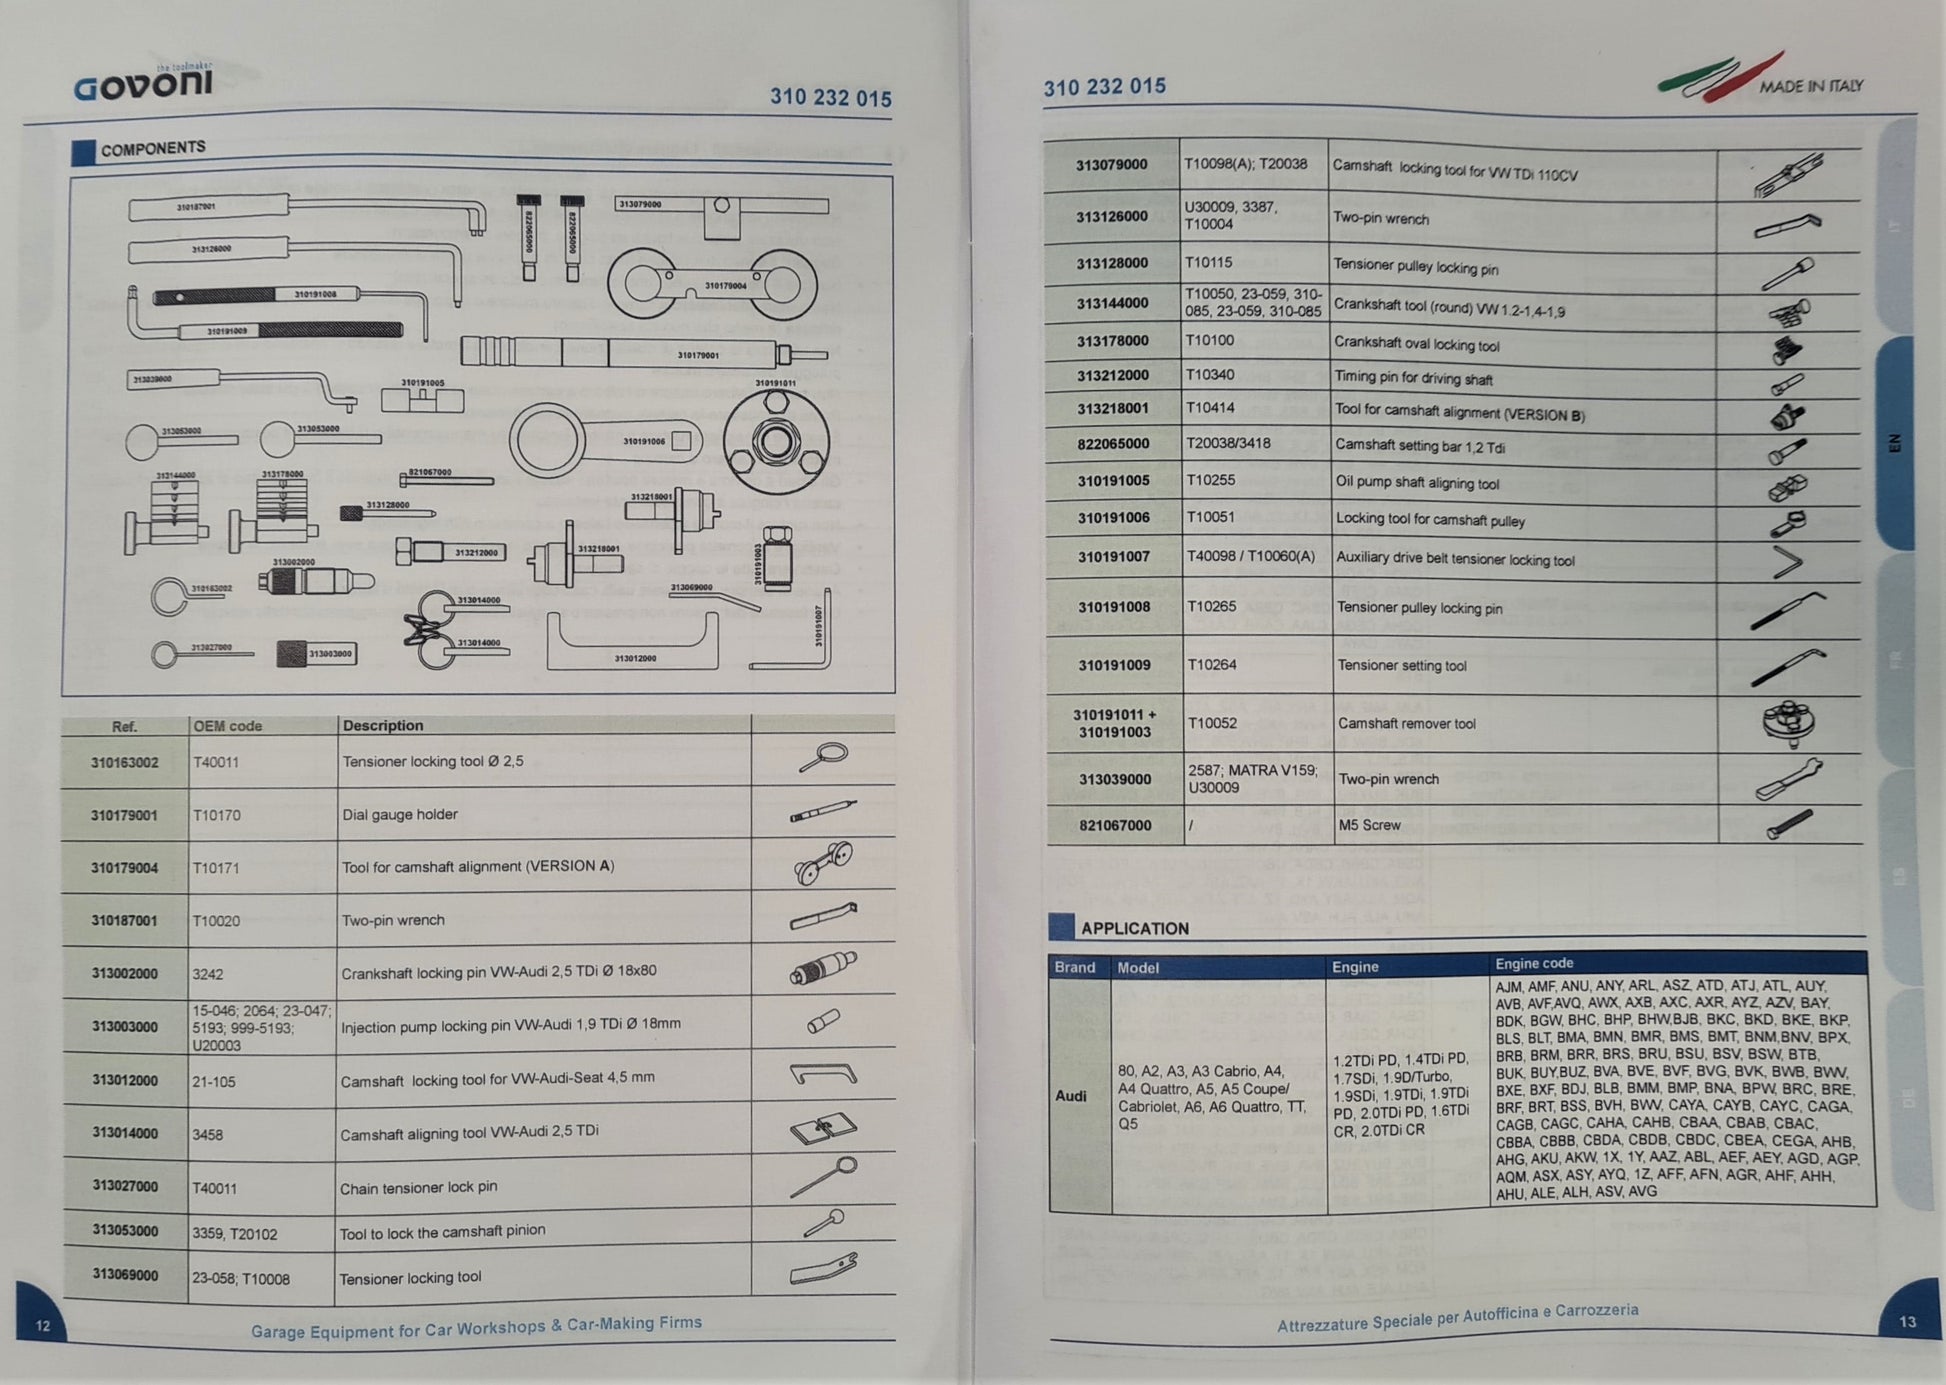 Govoni VW Group Diesel Timing Set Tool descriptions and applications